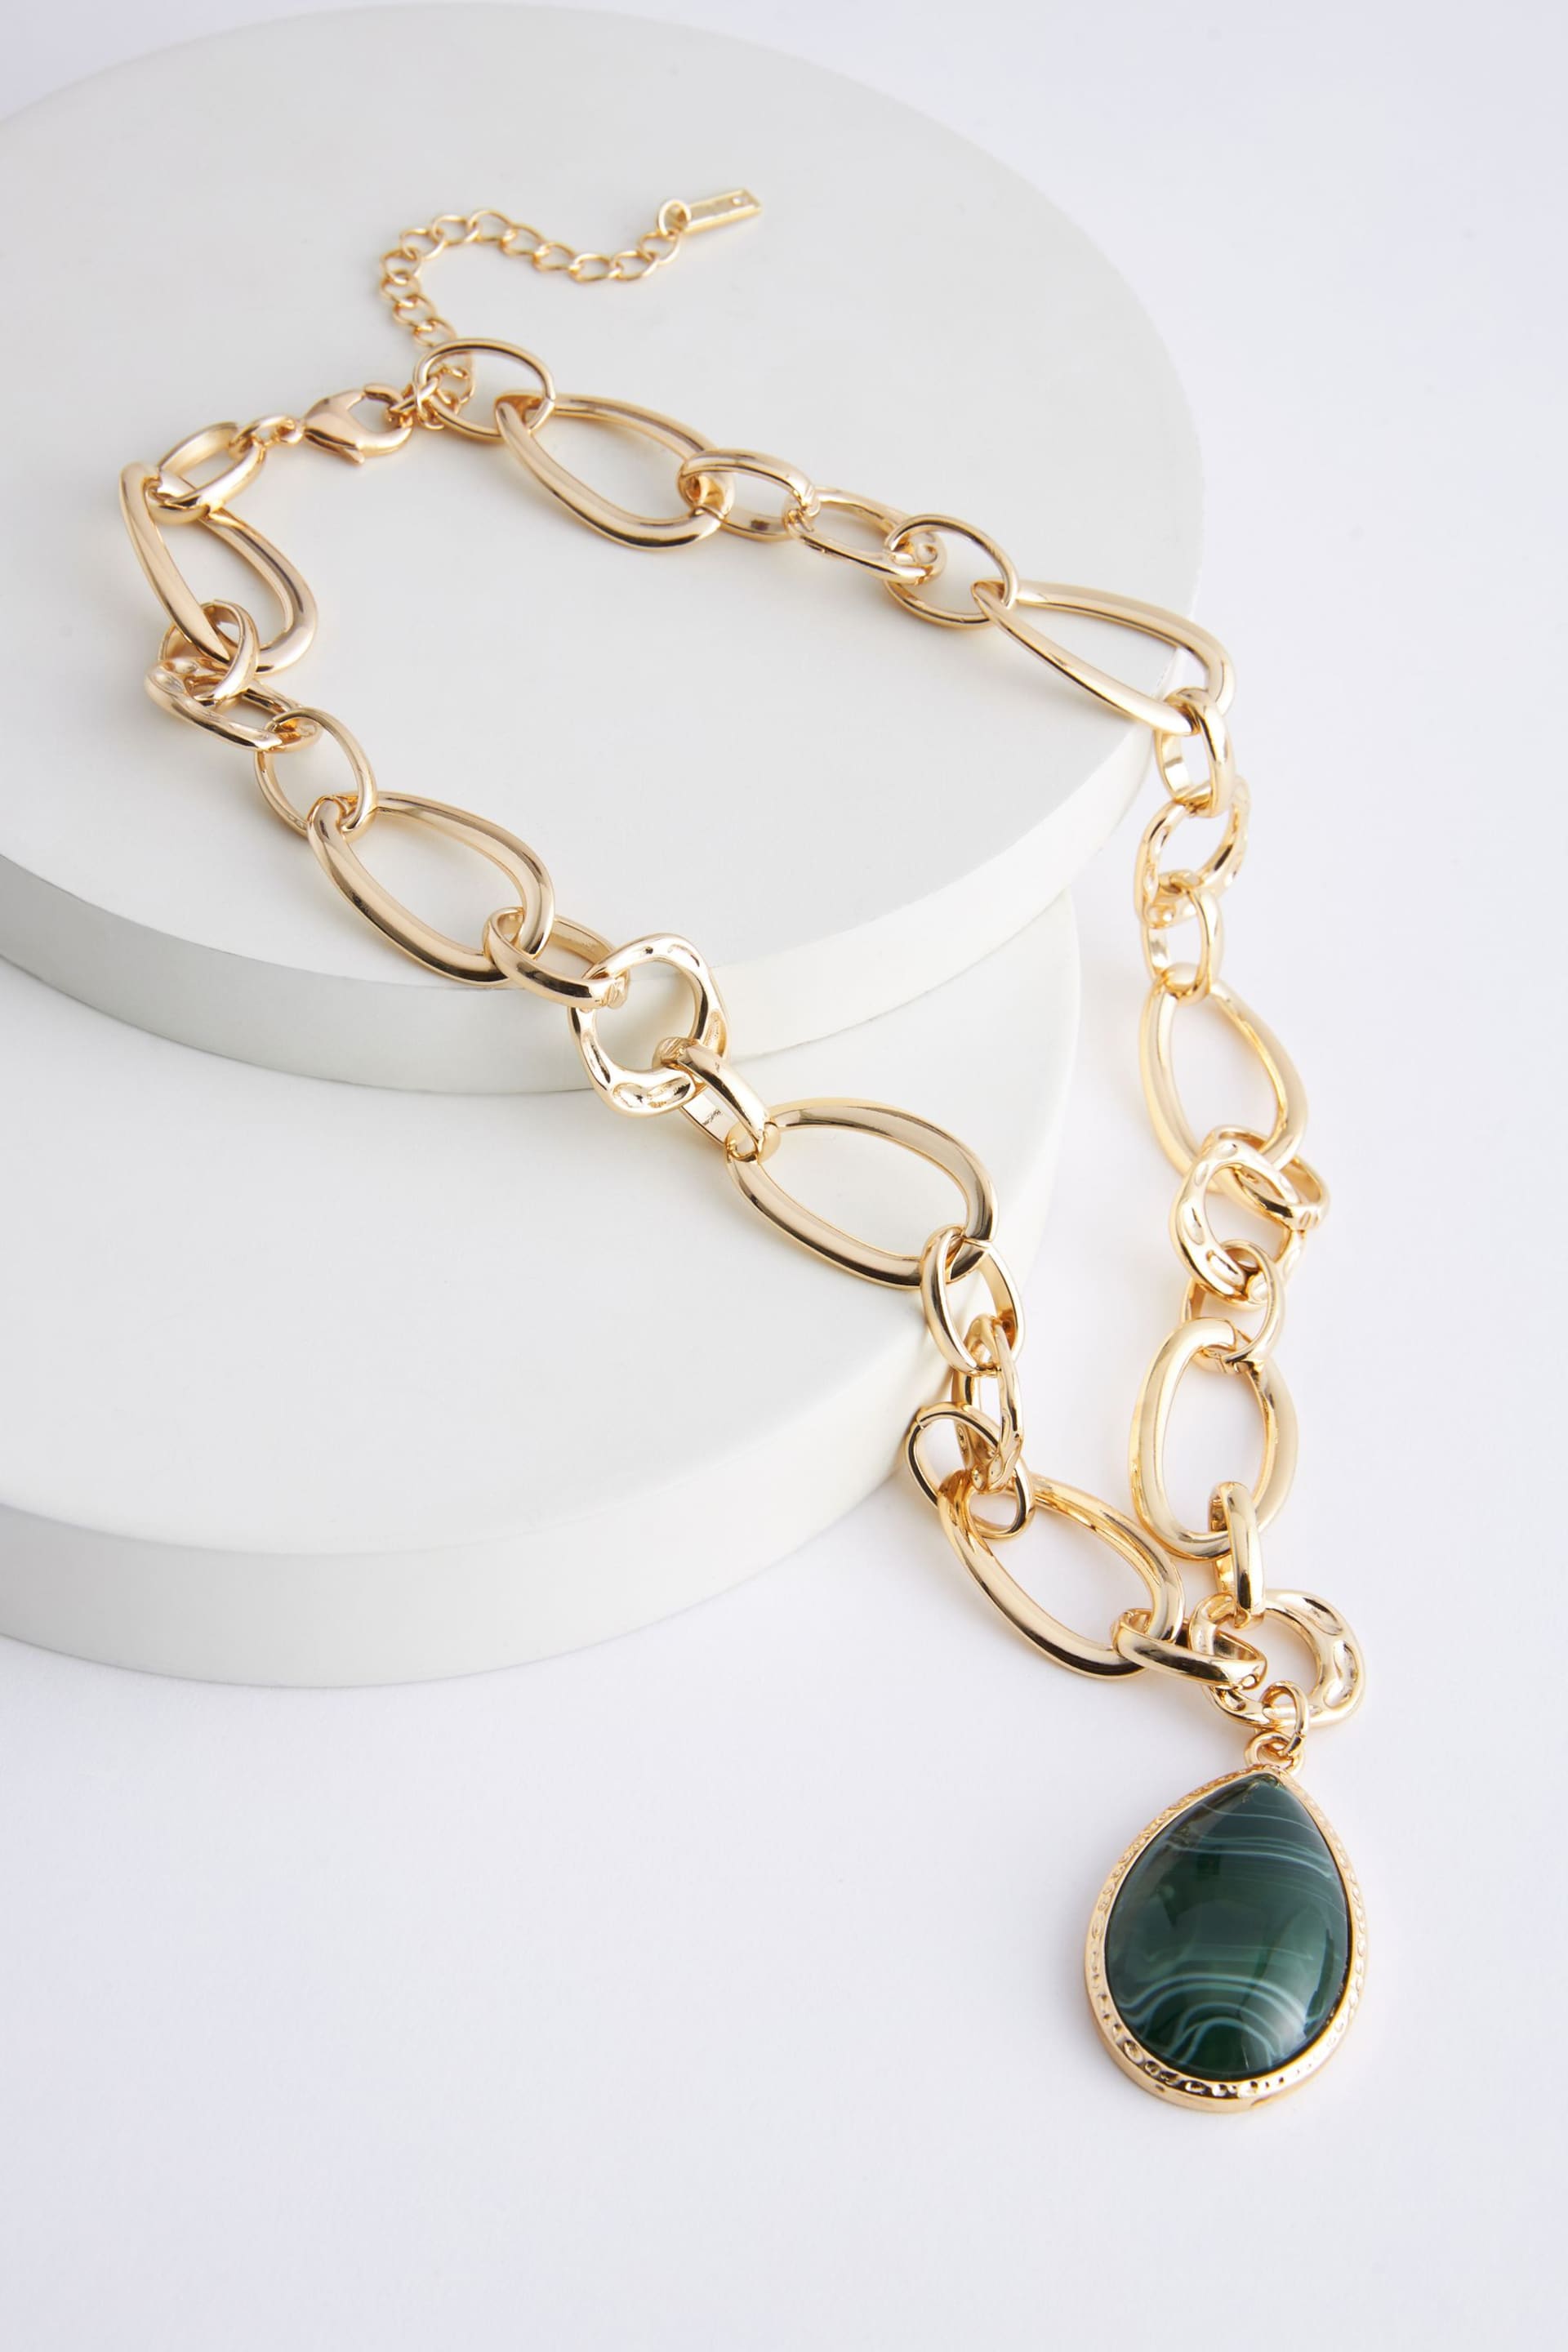 Gold Tone Chunky Chain Green Faux Stone Drop Necklace Made With Recycled Metals - Image 3 of 4